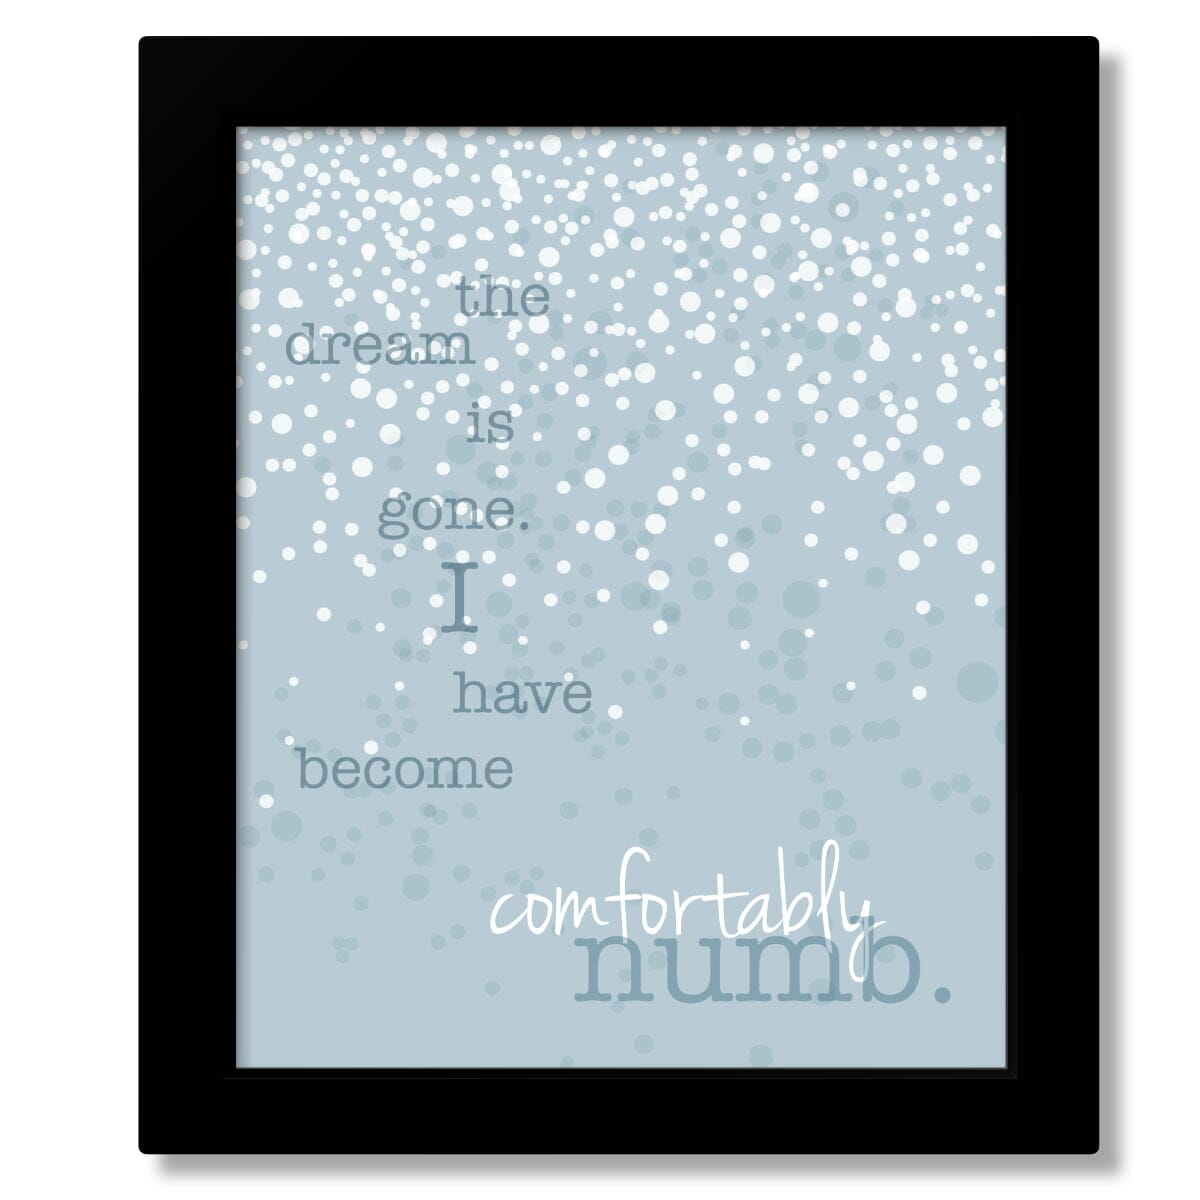 Comfortably Numb by Pink Floyd - Psychedelic Song Lyric Art Song Lyrics Art Song Lyrics Art 8x10 Framed Print (without mat) 